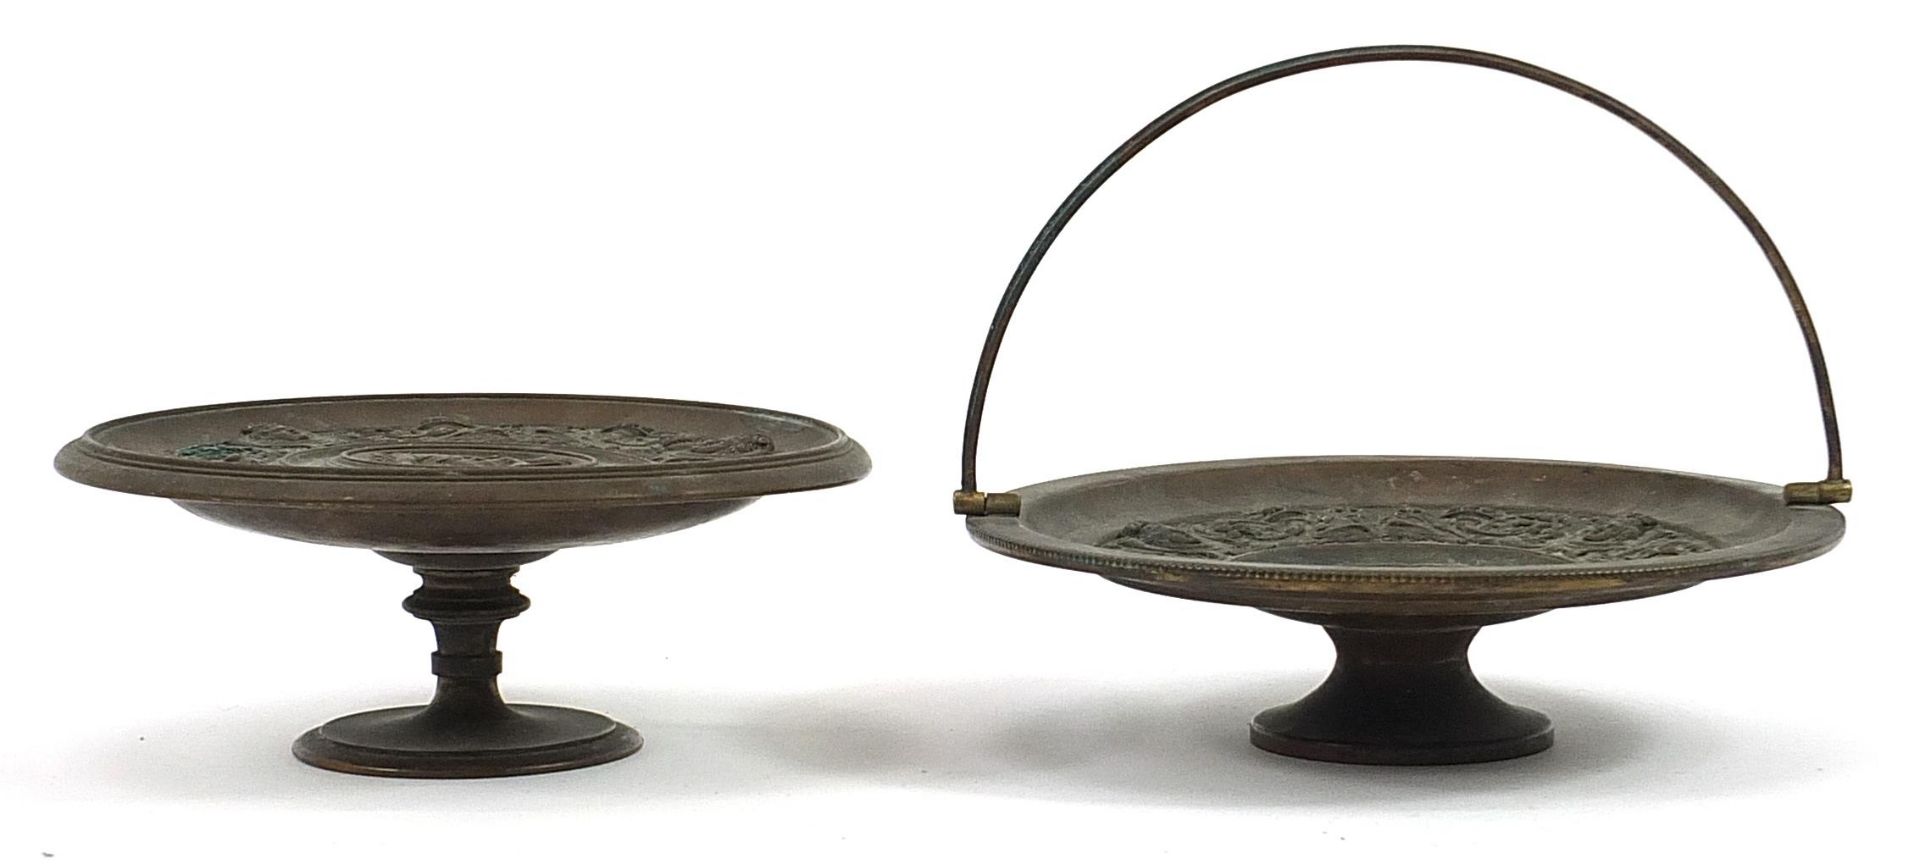 Grand Tour bronzed comport and pedestal dish with swing handle, each decorated with classical - Image 2 of 4